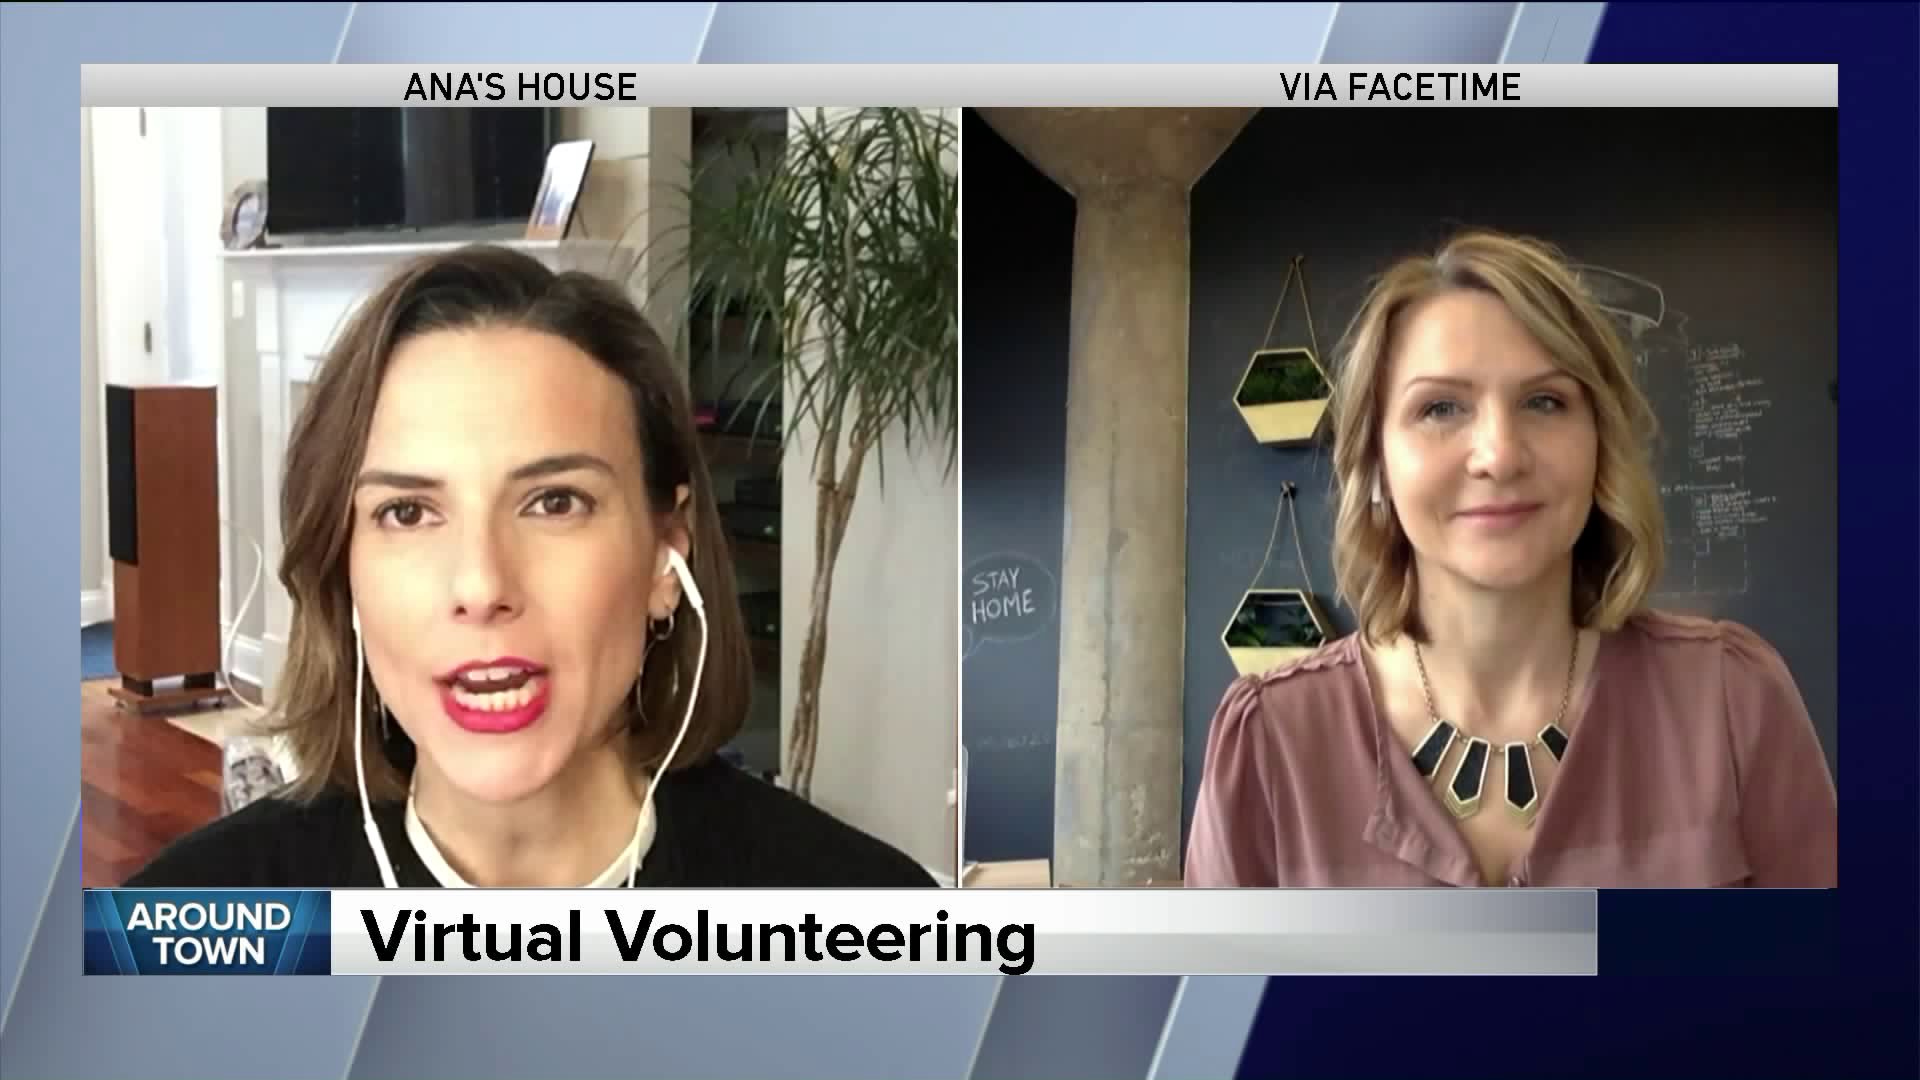 Around ‘The House’ talks with The Honeycomb Project about virtual volunteering